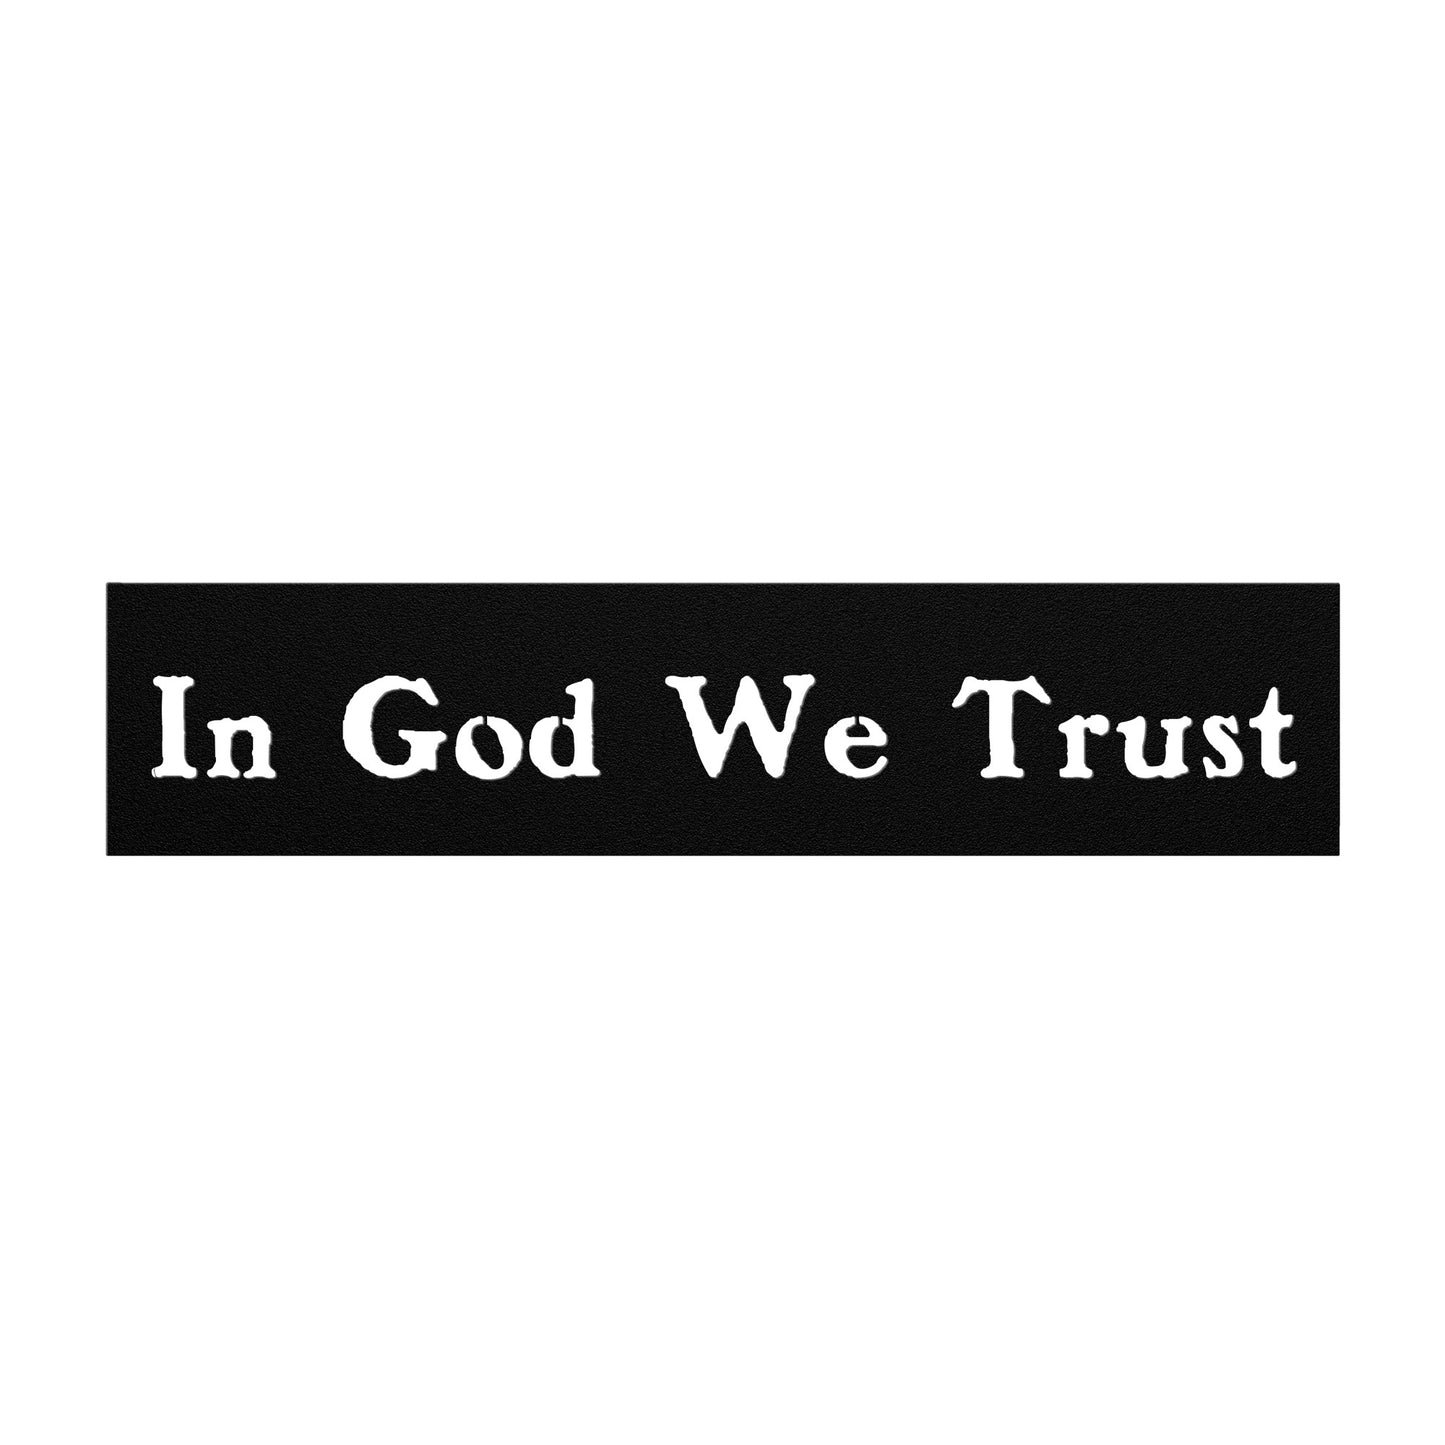 Metal sign with "In God We Trust" motto for home decor